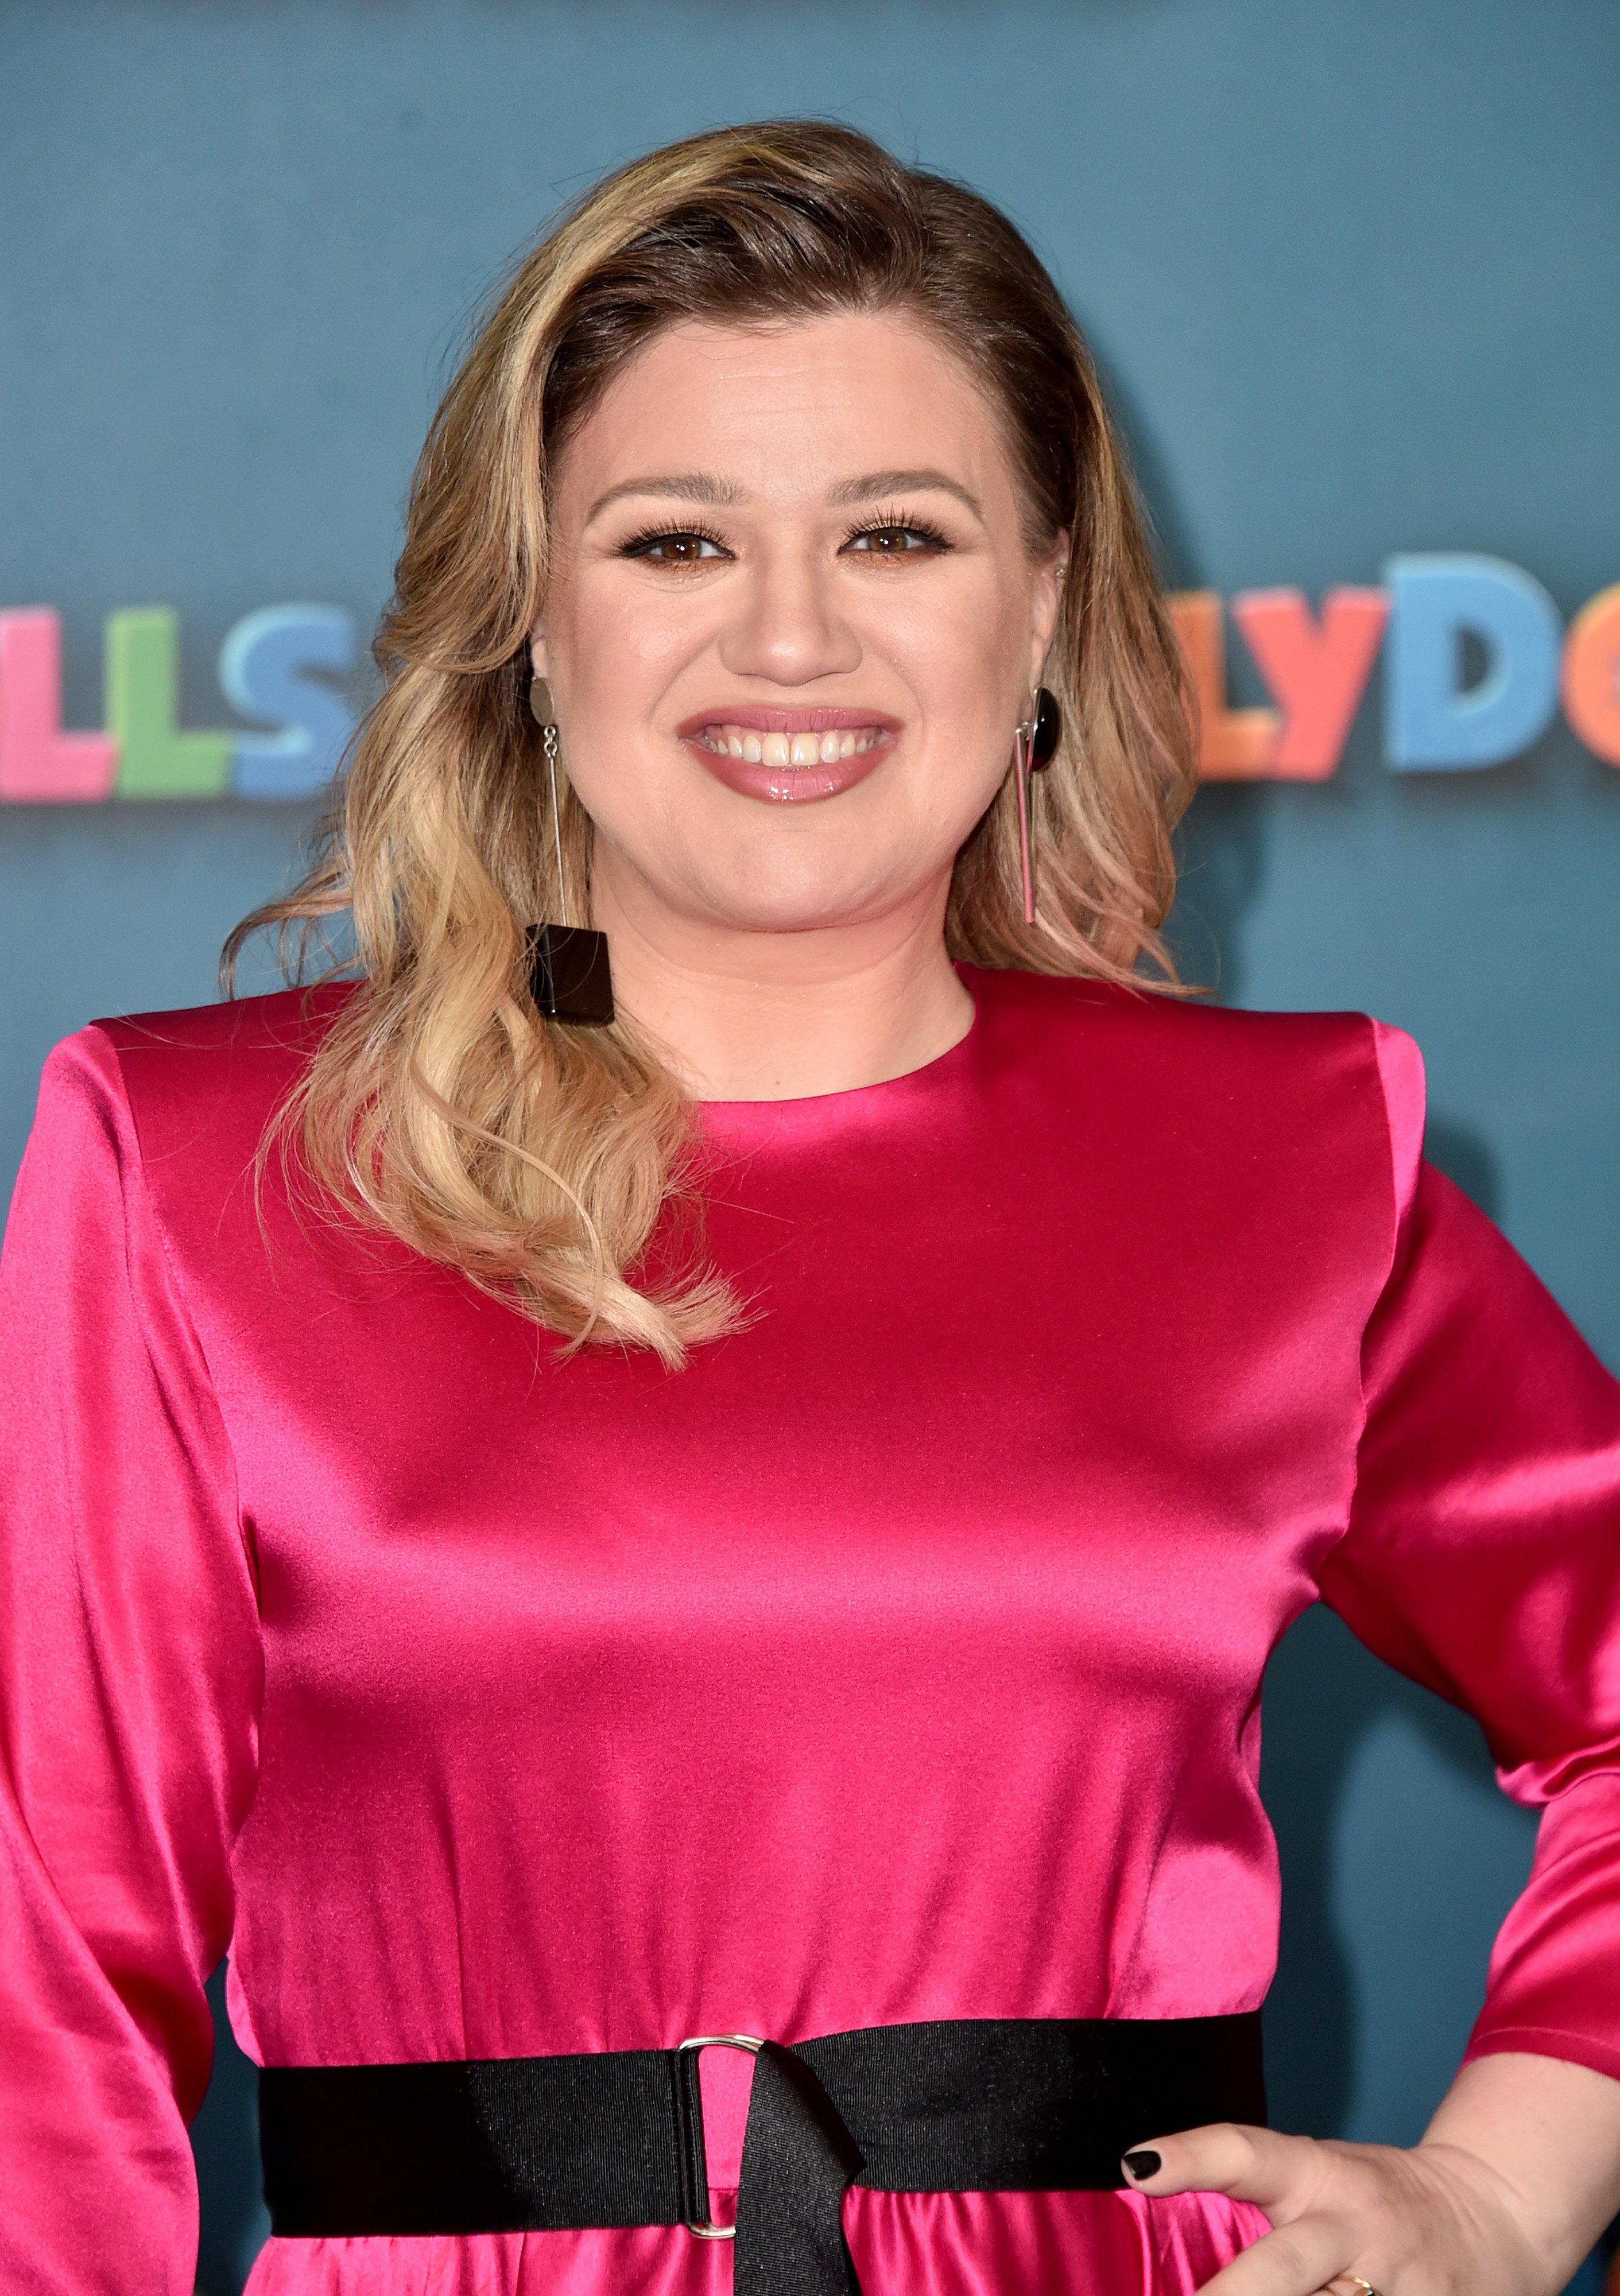 Kelly Clarkson in California in 2019. | Source: Getty Images